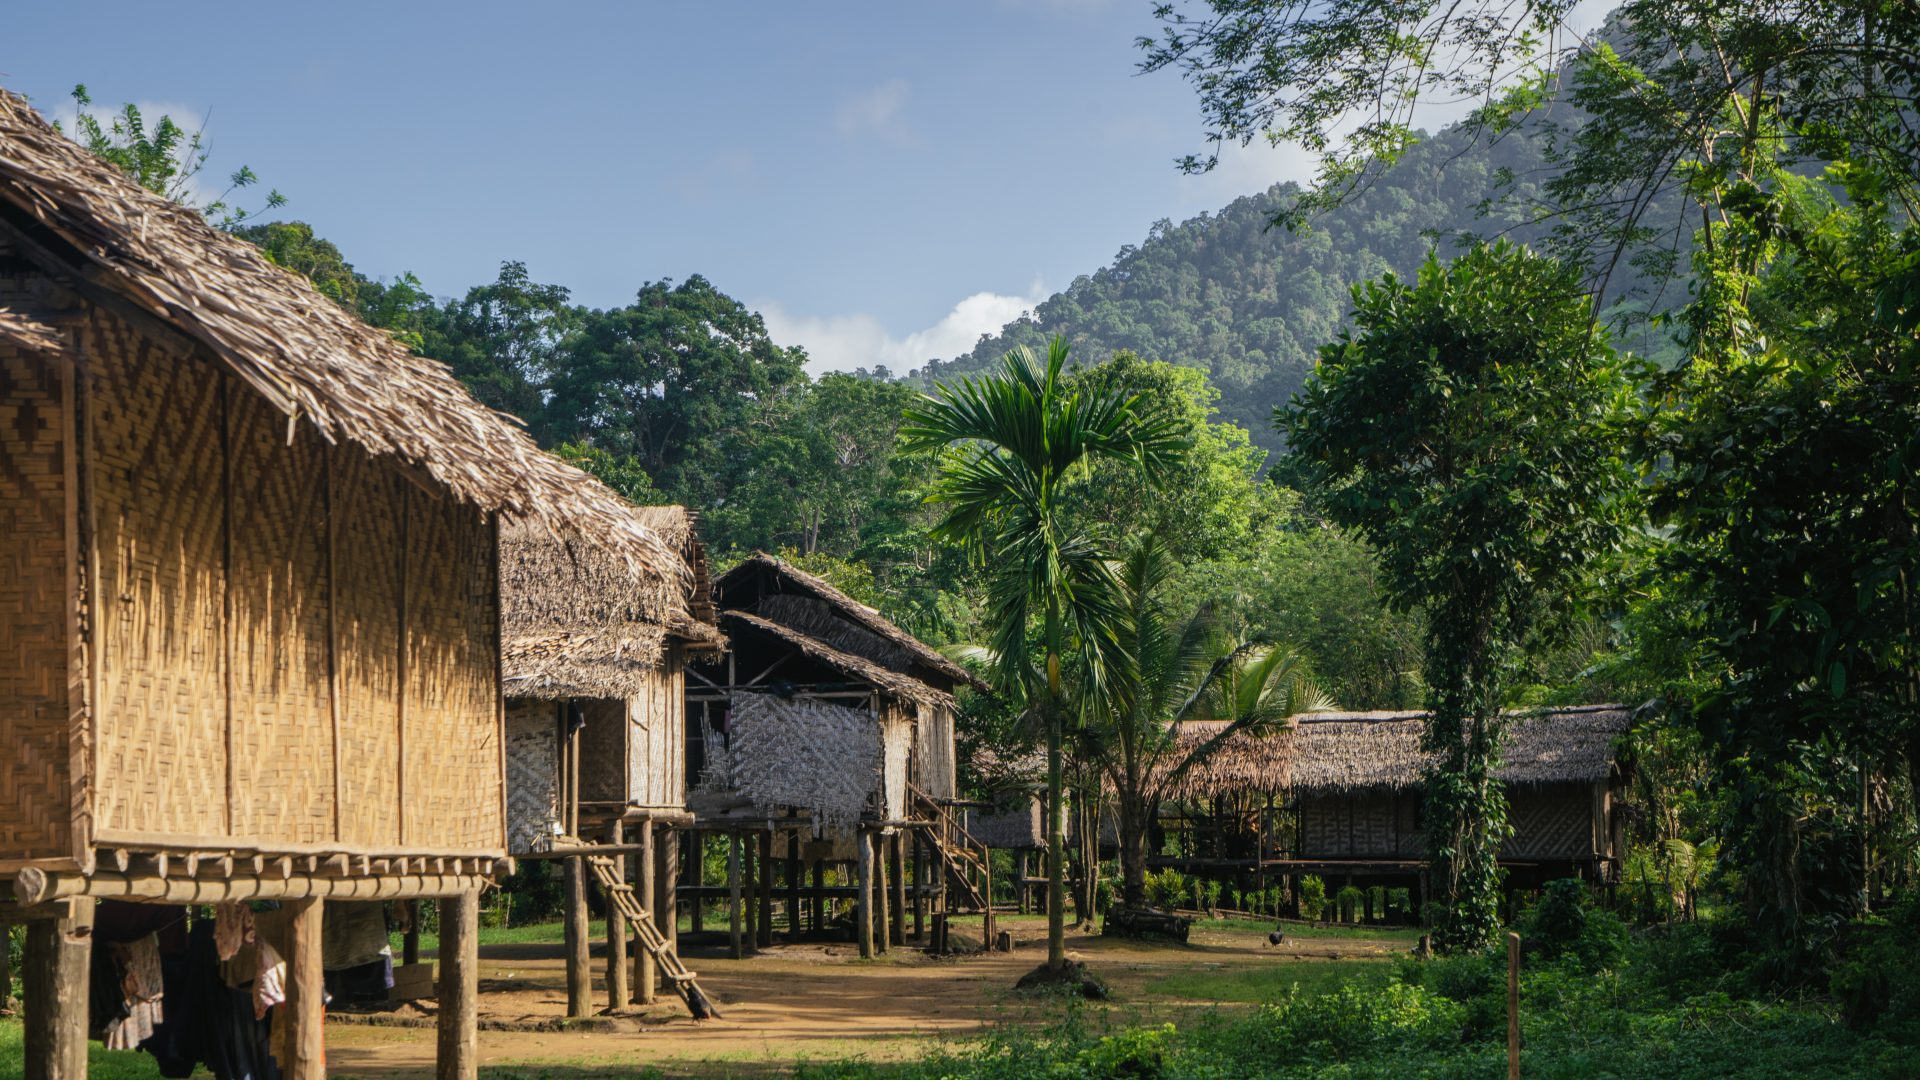 Houses constructed wood with sago palm rooves surrounded by forest.